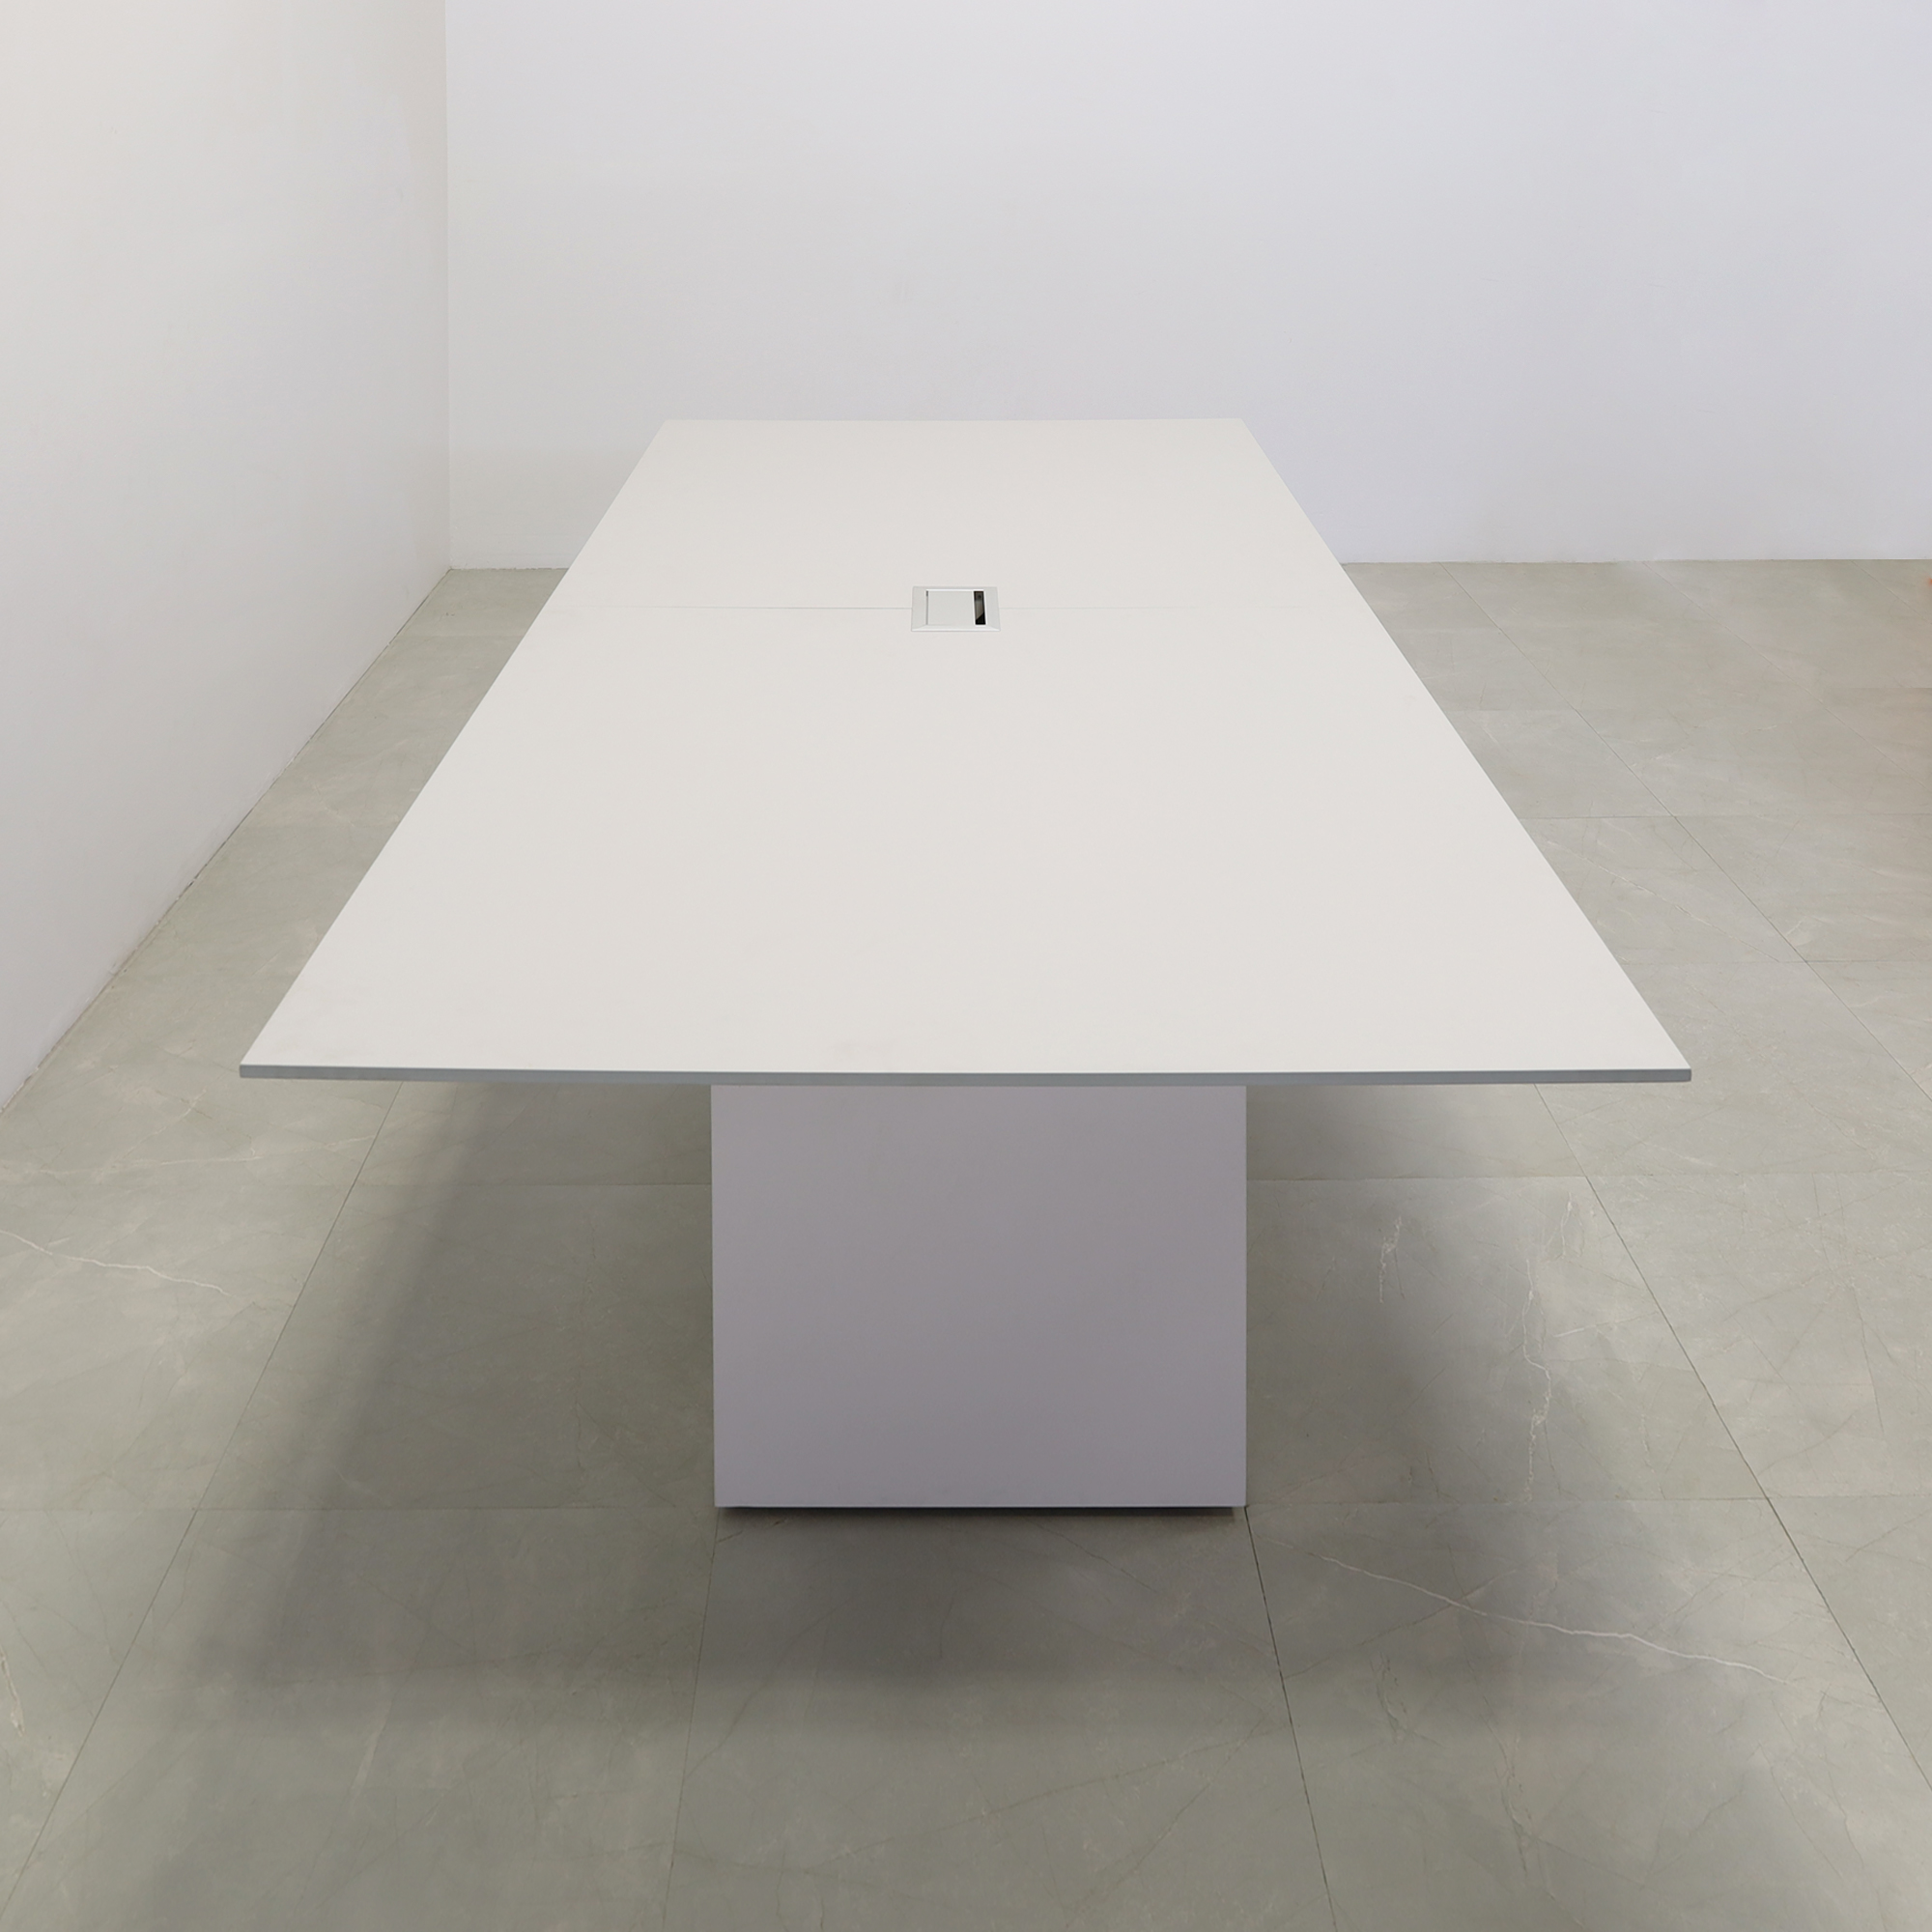 102 inches Aurora Rectangular Conference Table in Light Gray Engineered Stone Top and White Matte Laminate finish base. One Ellora power box shown here.